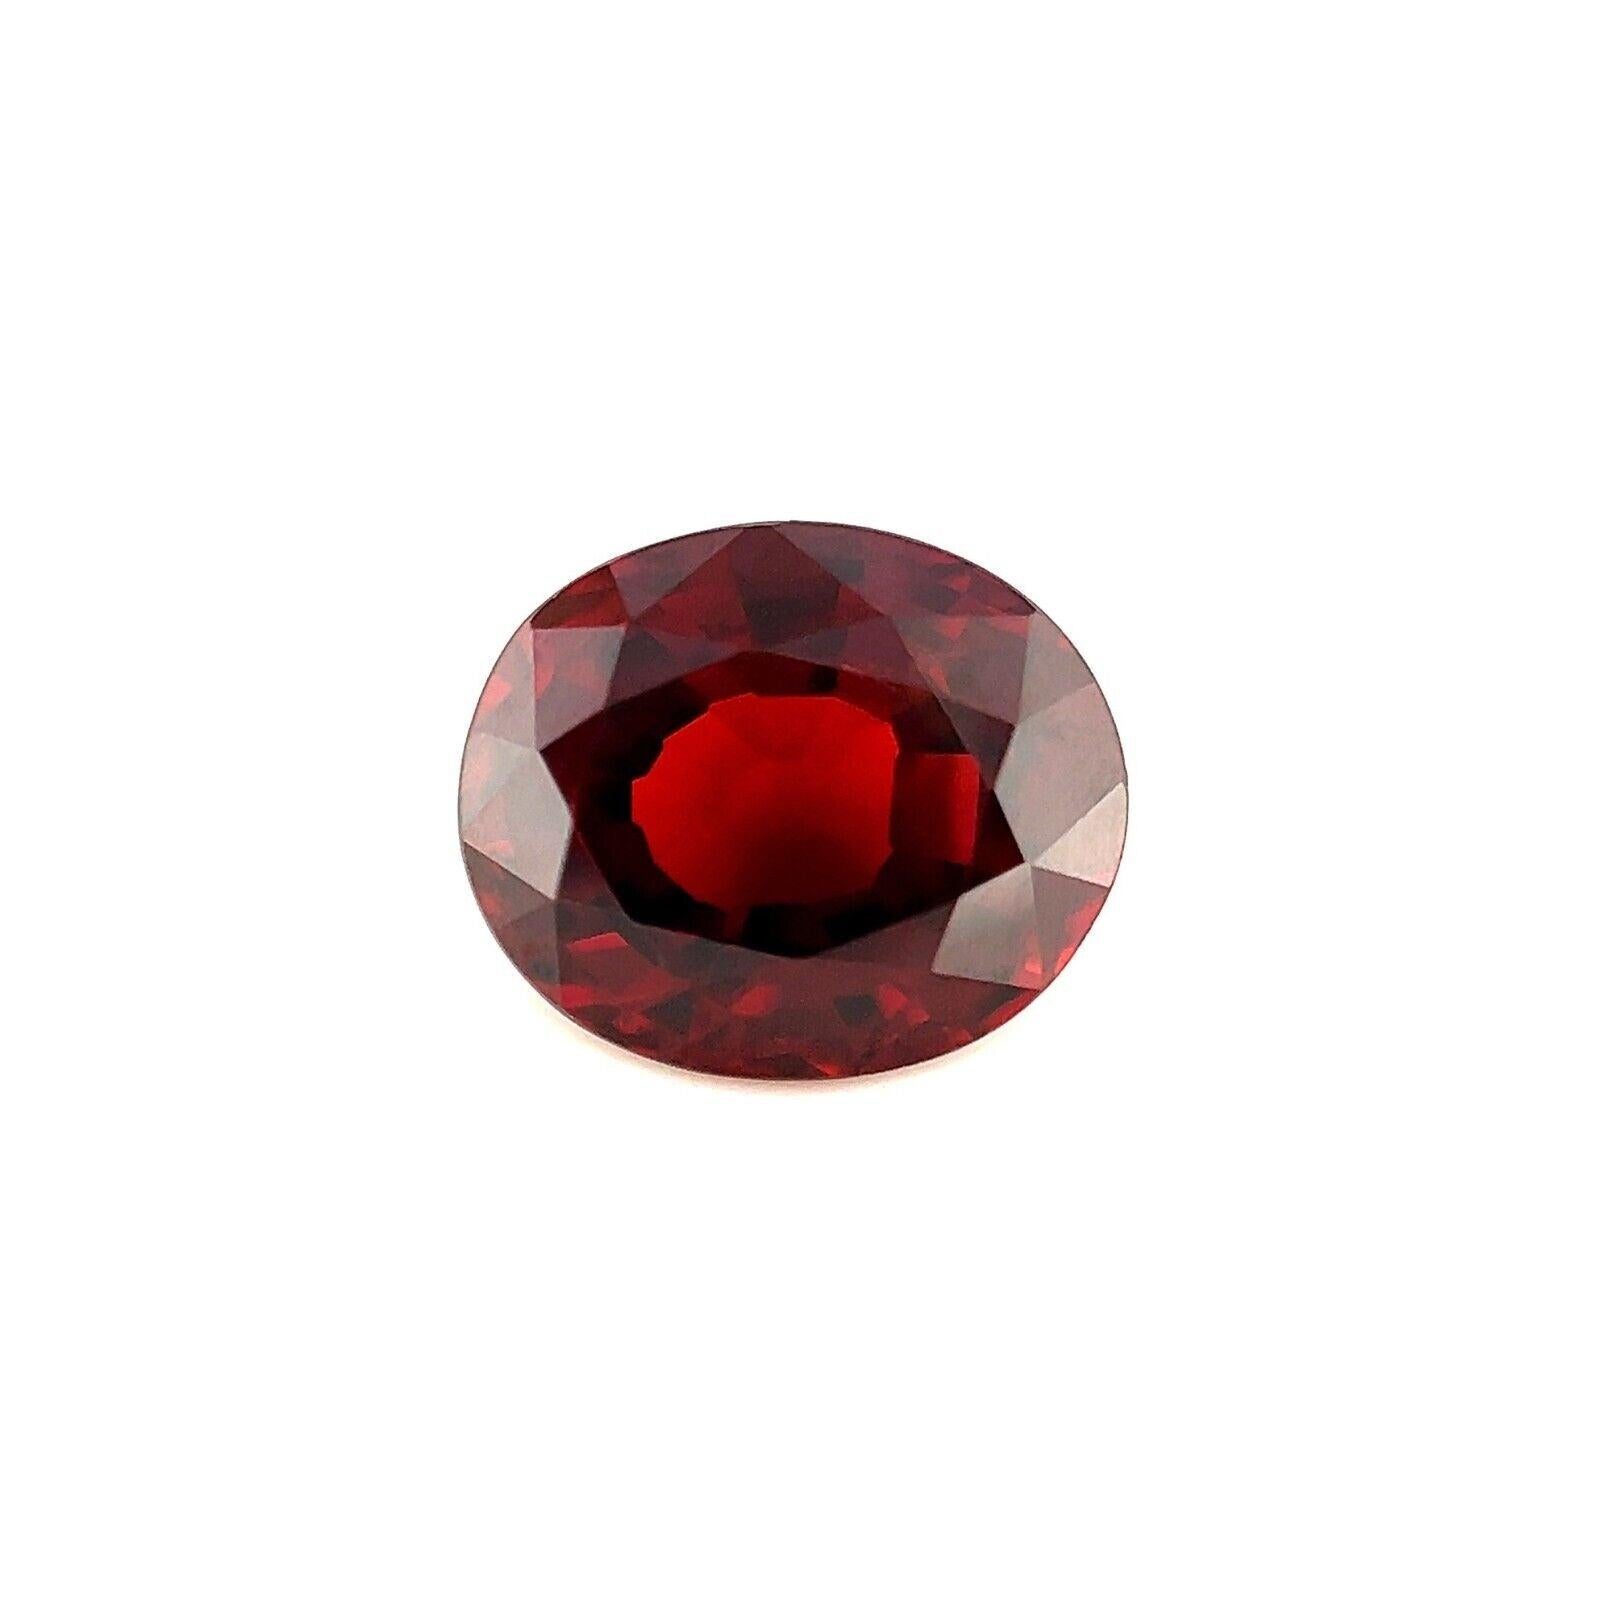 Deep Orange Red Spessartite Garnet 2.36ct Oval Cut 8.2x6.8mm Loose Gemstone VVS

Natural Loose Spessartite Garnet Gemstone.
2.36 Carat with a beautiful deep orange red colour and very good clarity, a clean stone with only some small natural